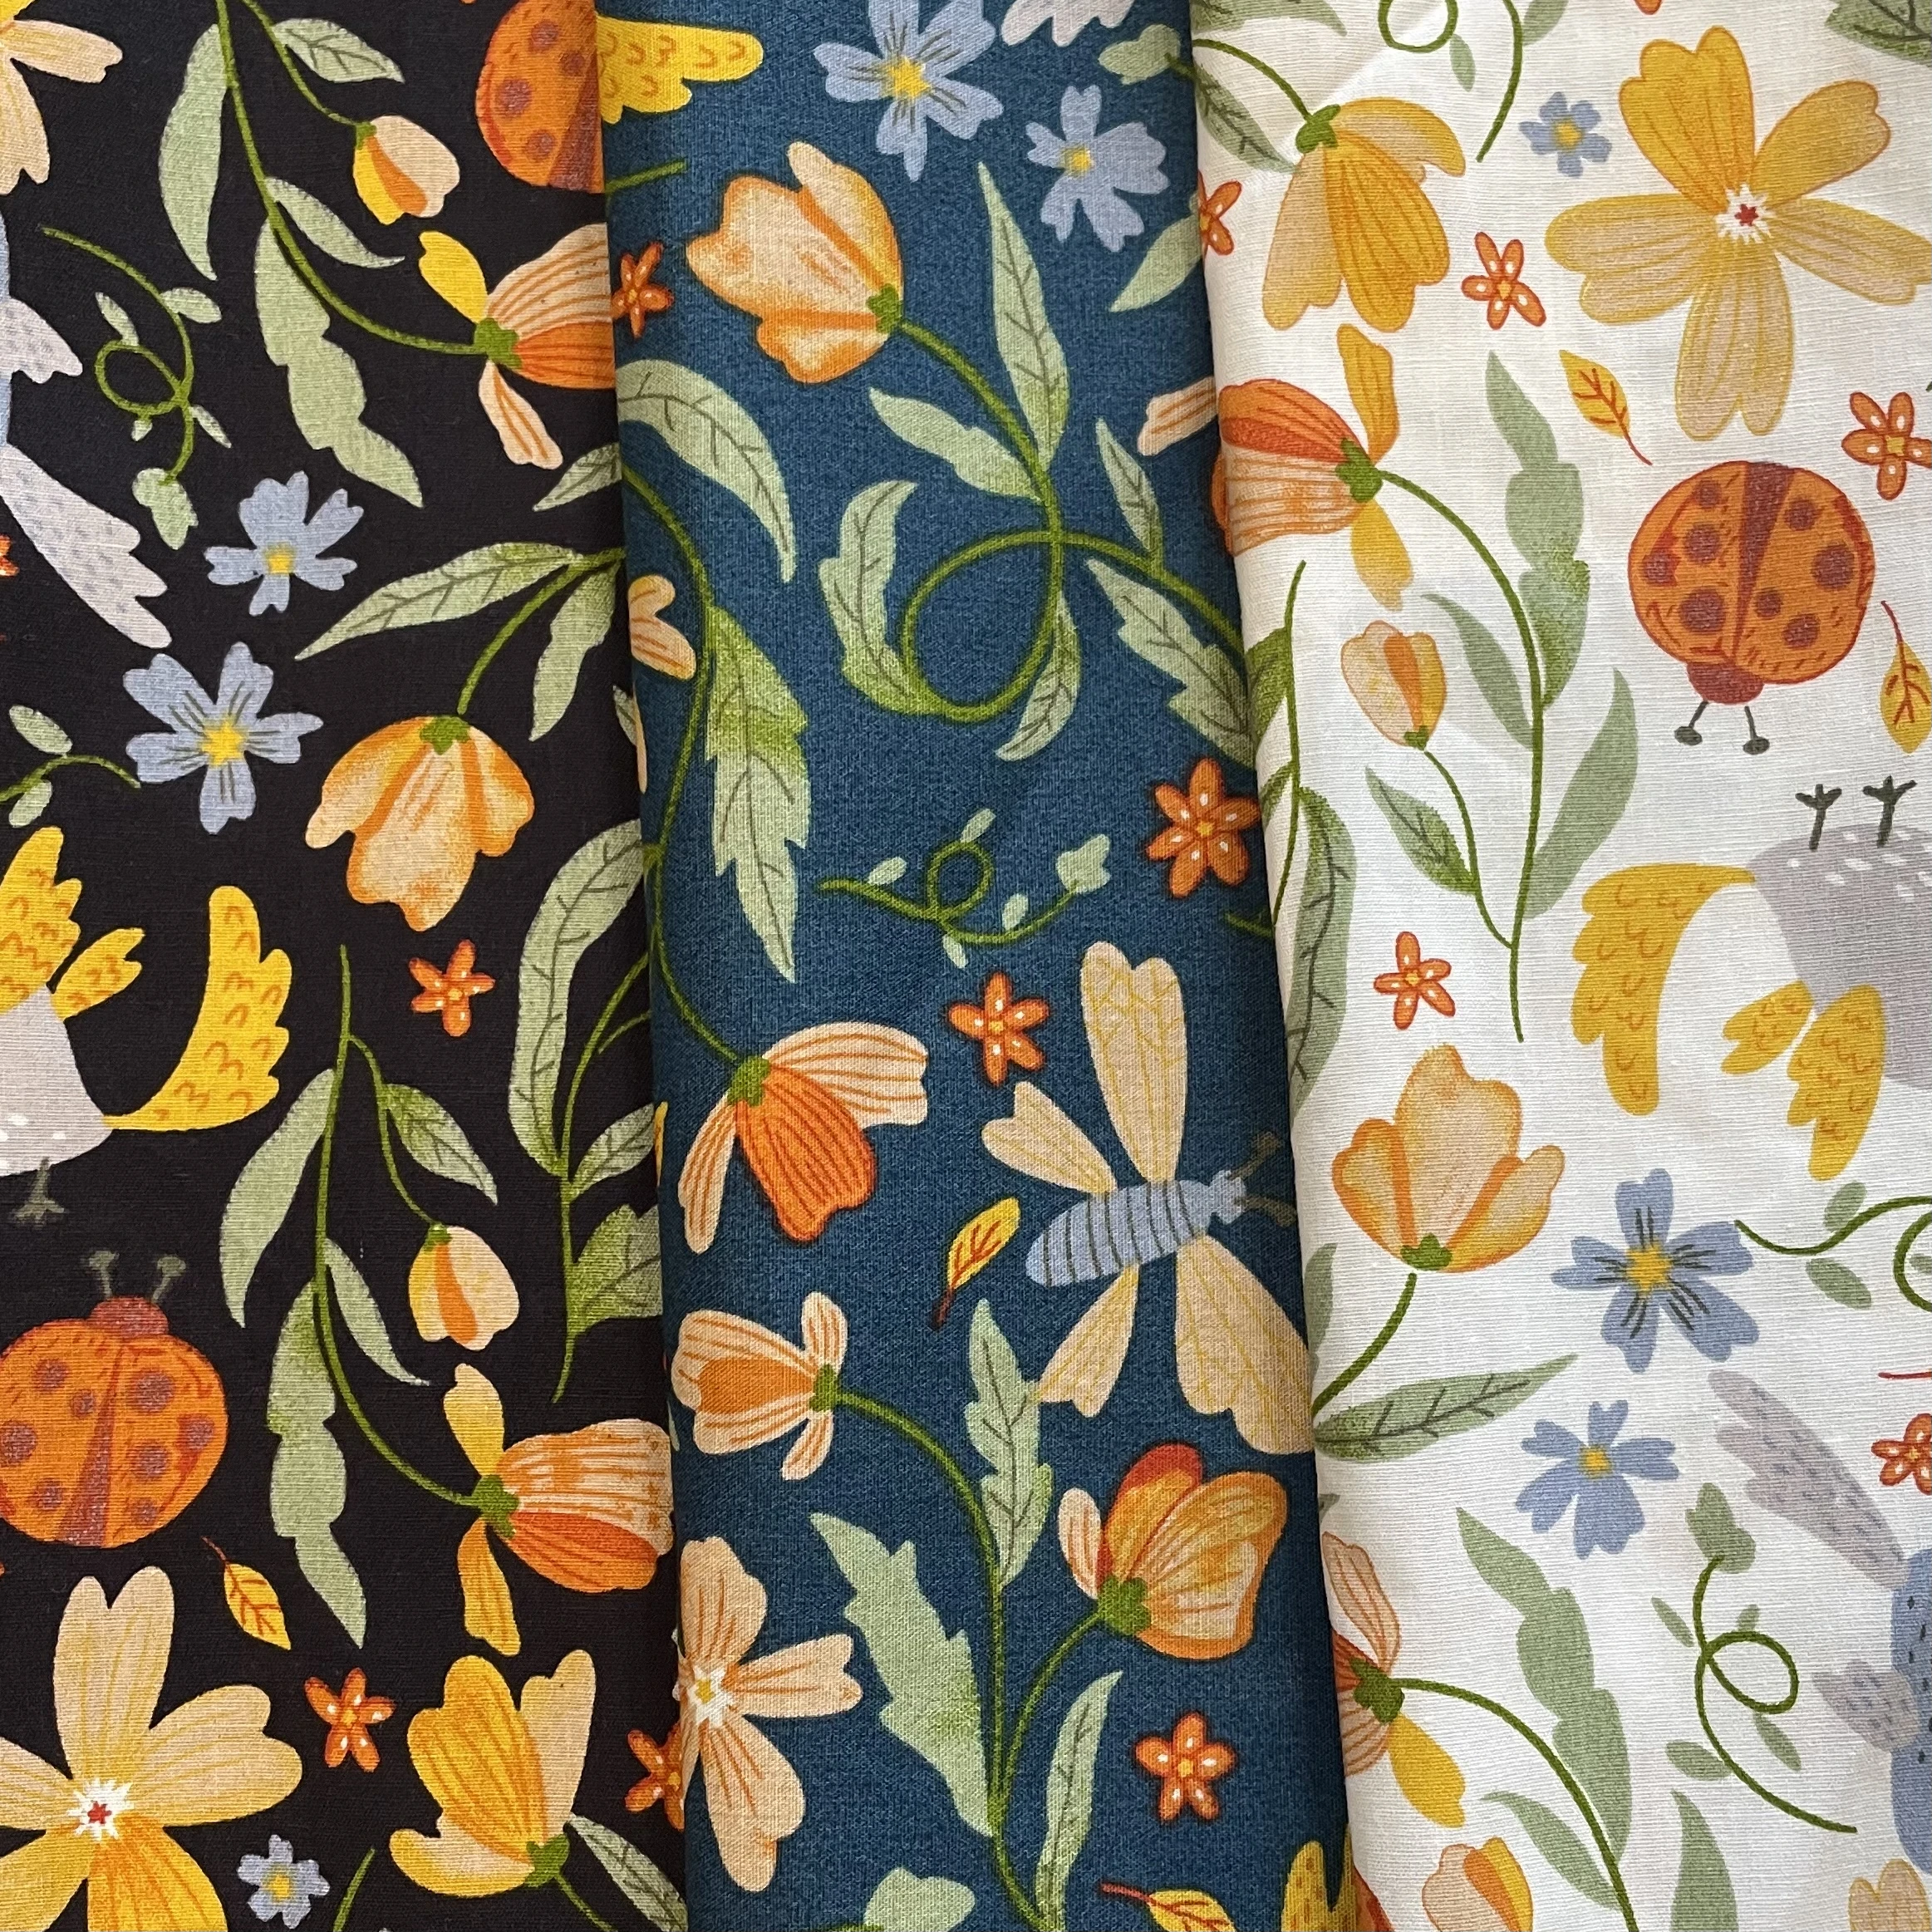 Green Jungle 40S Tissun Liberty Cotton Fabric For Kids Baby Sewing Cloth Dresses Skirt DIY Handmade Designer Patchwork Meter chainho 8pcs lot brown floral series printed twill cotton fabric patchwork cloth for diy sewing